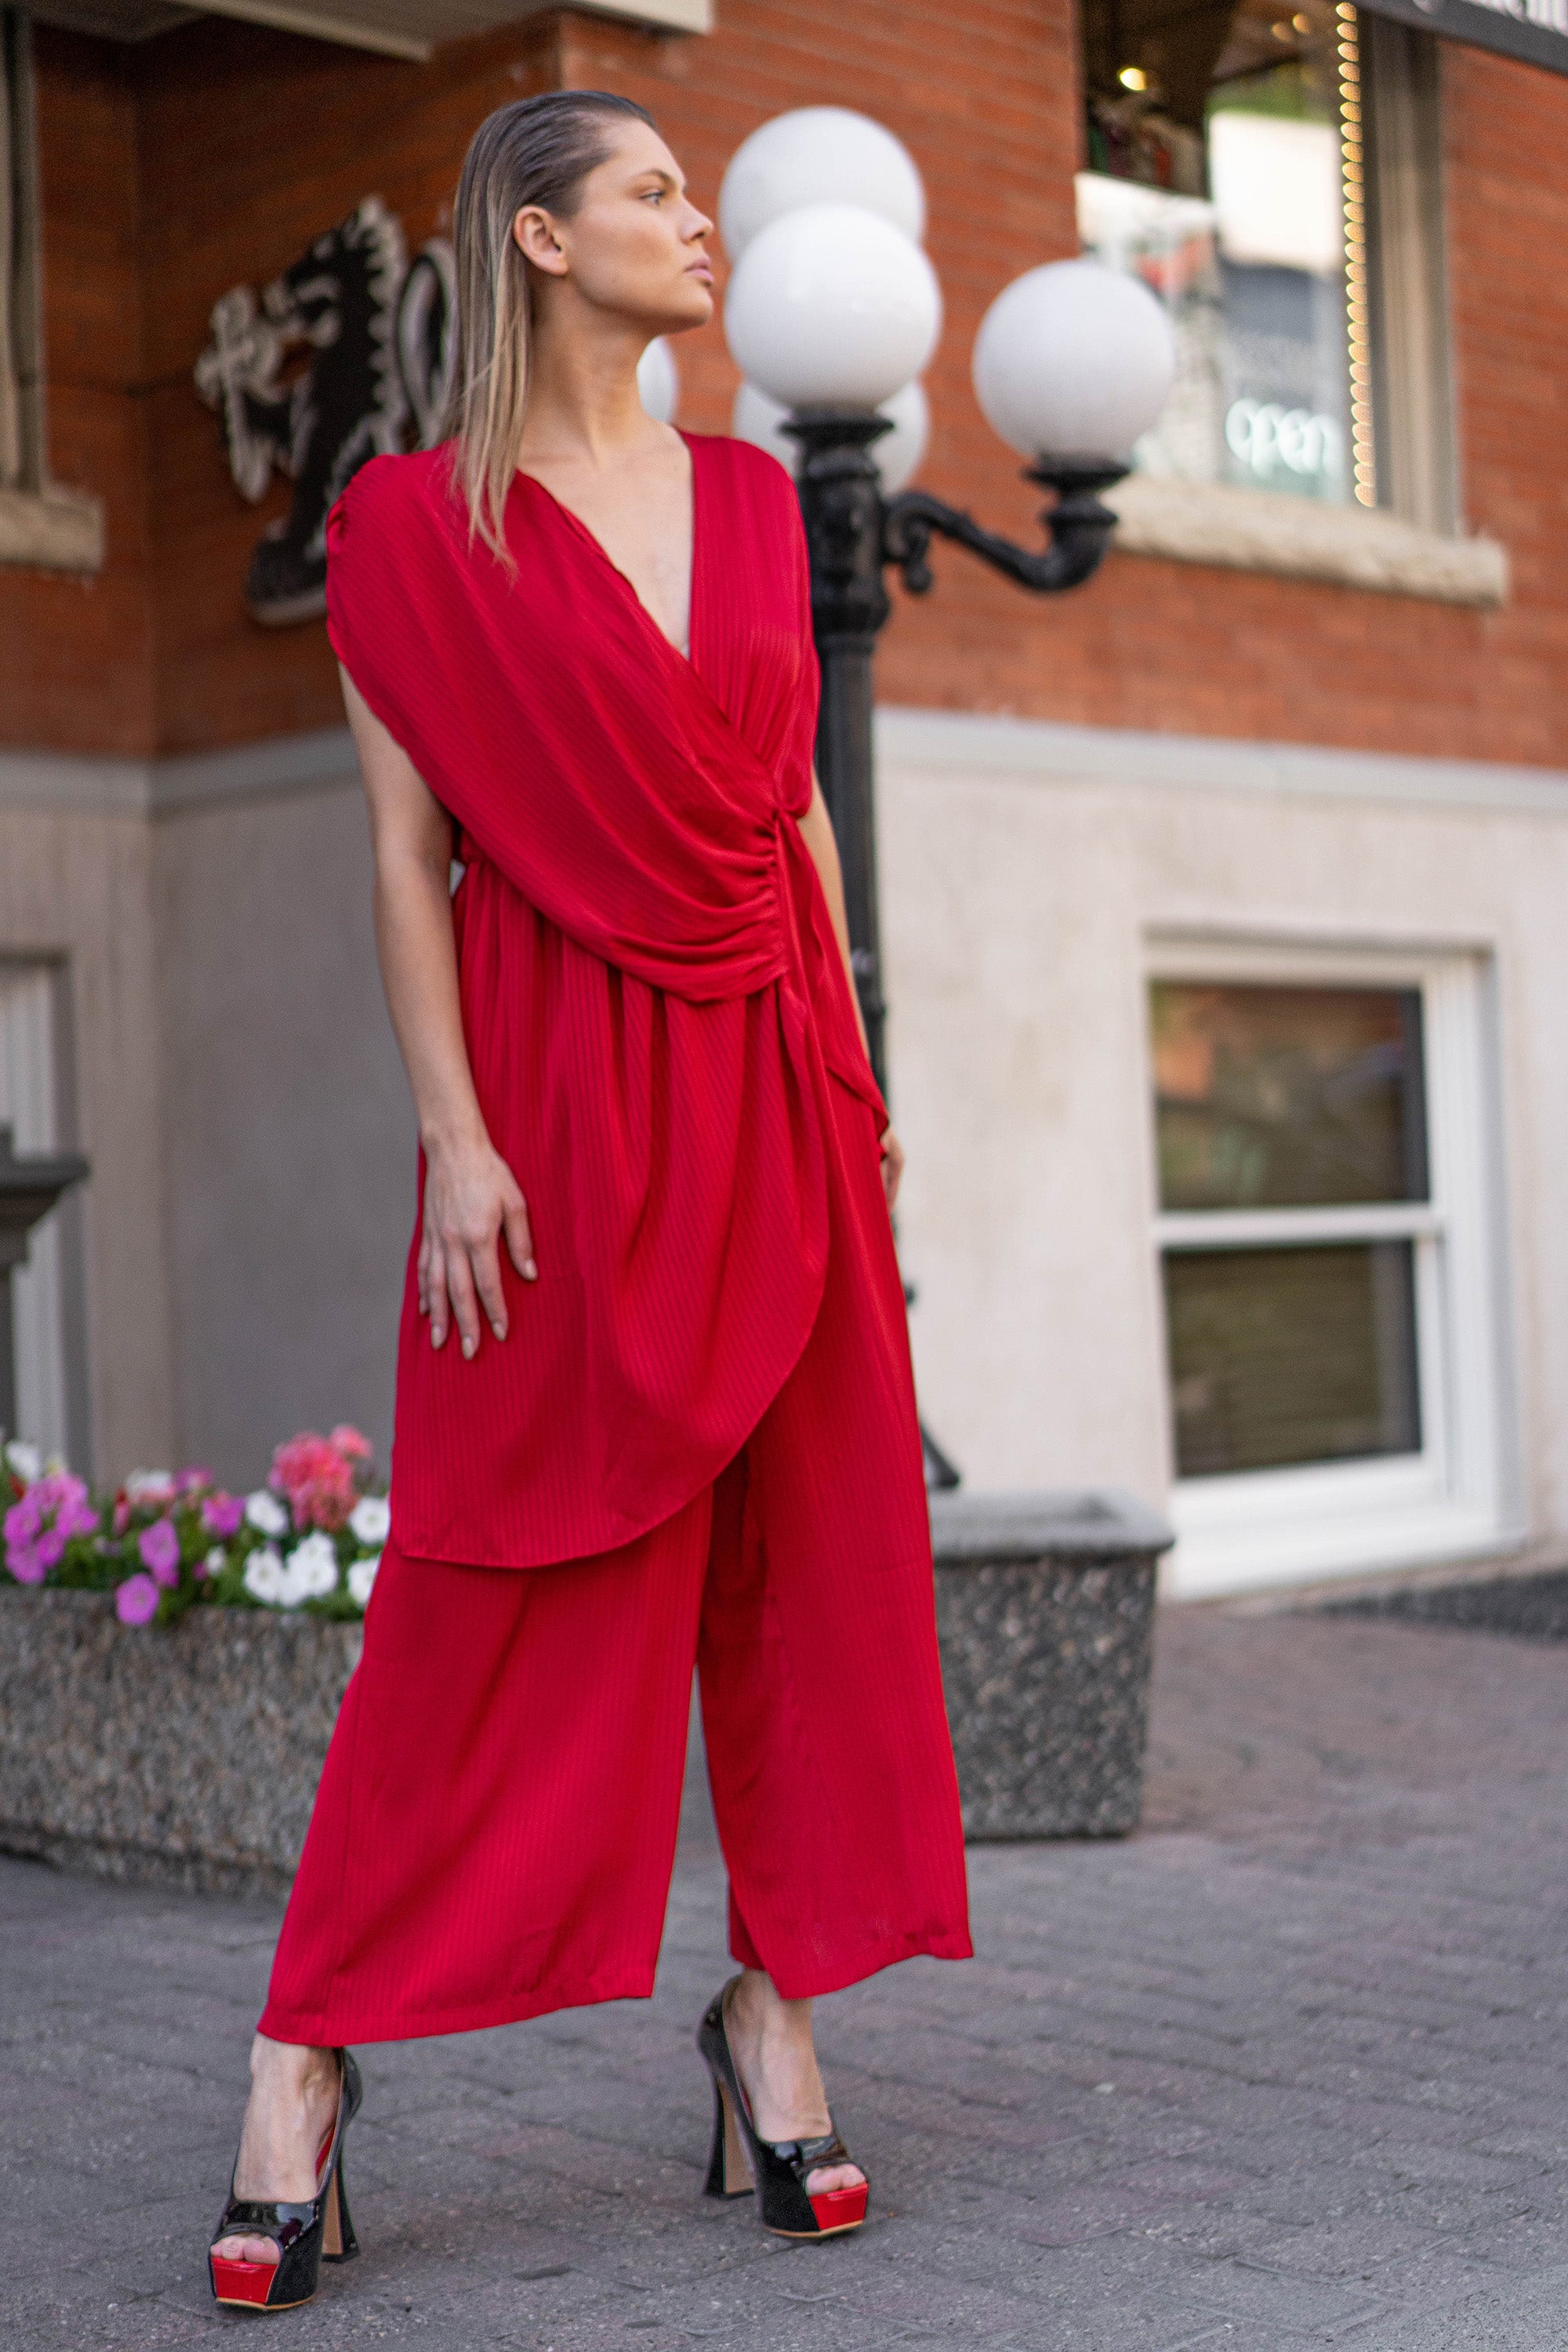 How to style a formal evening jumpsuits or elegant evening jumpsuits?